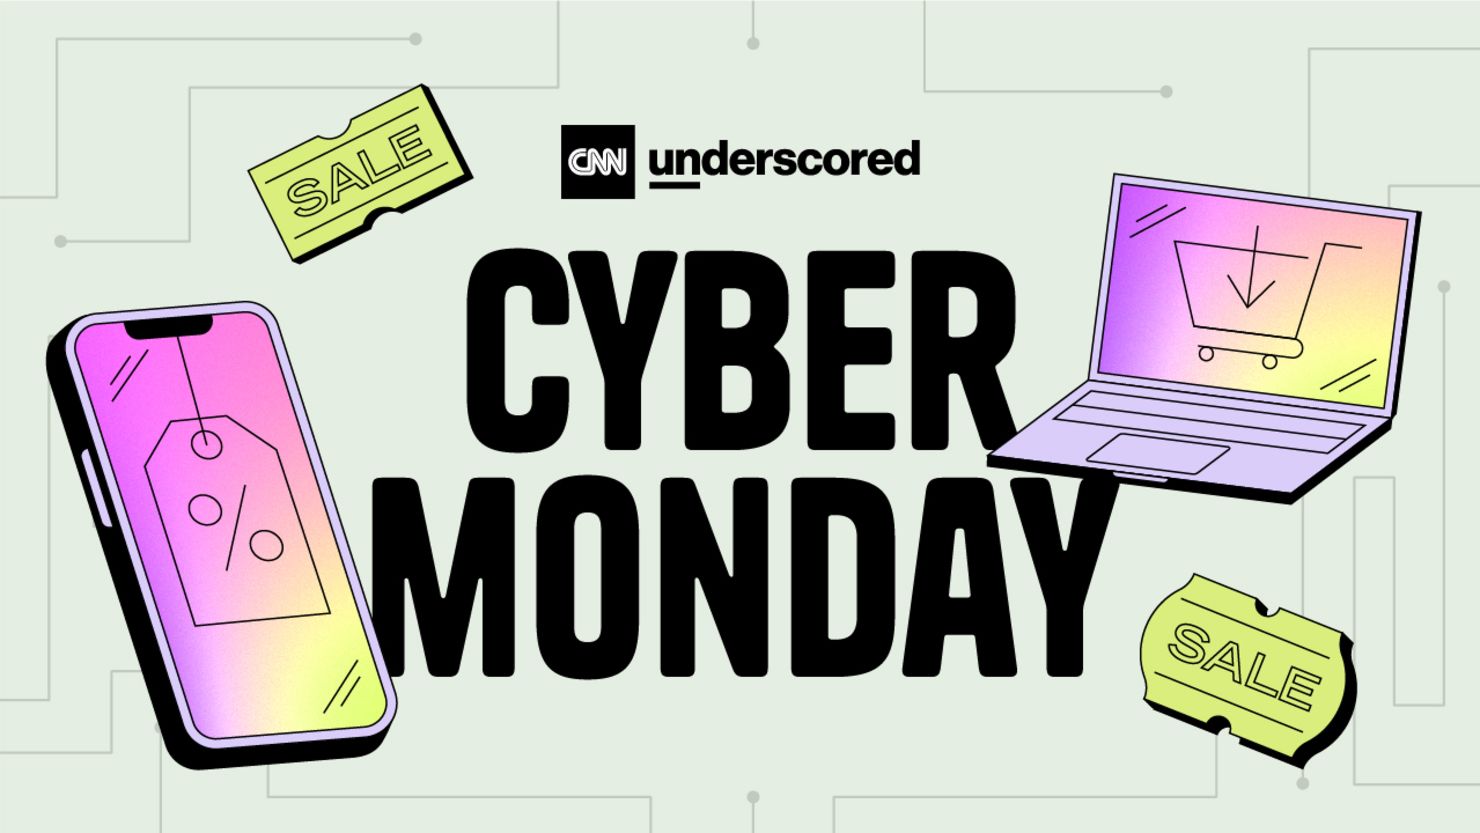 12 Early Cyber Monday Deals Under $50 at